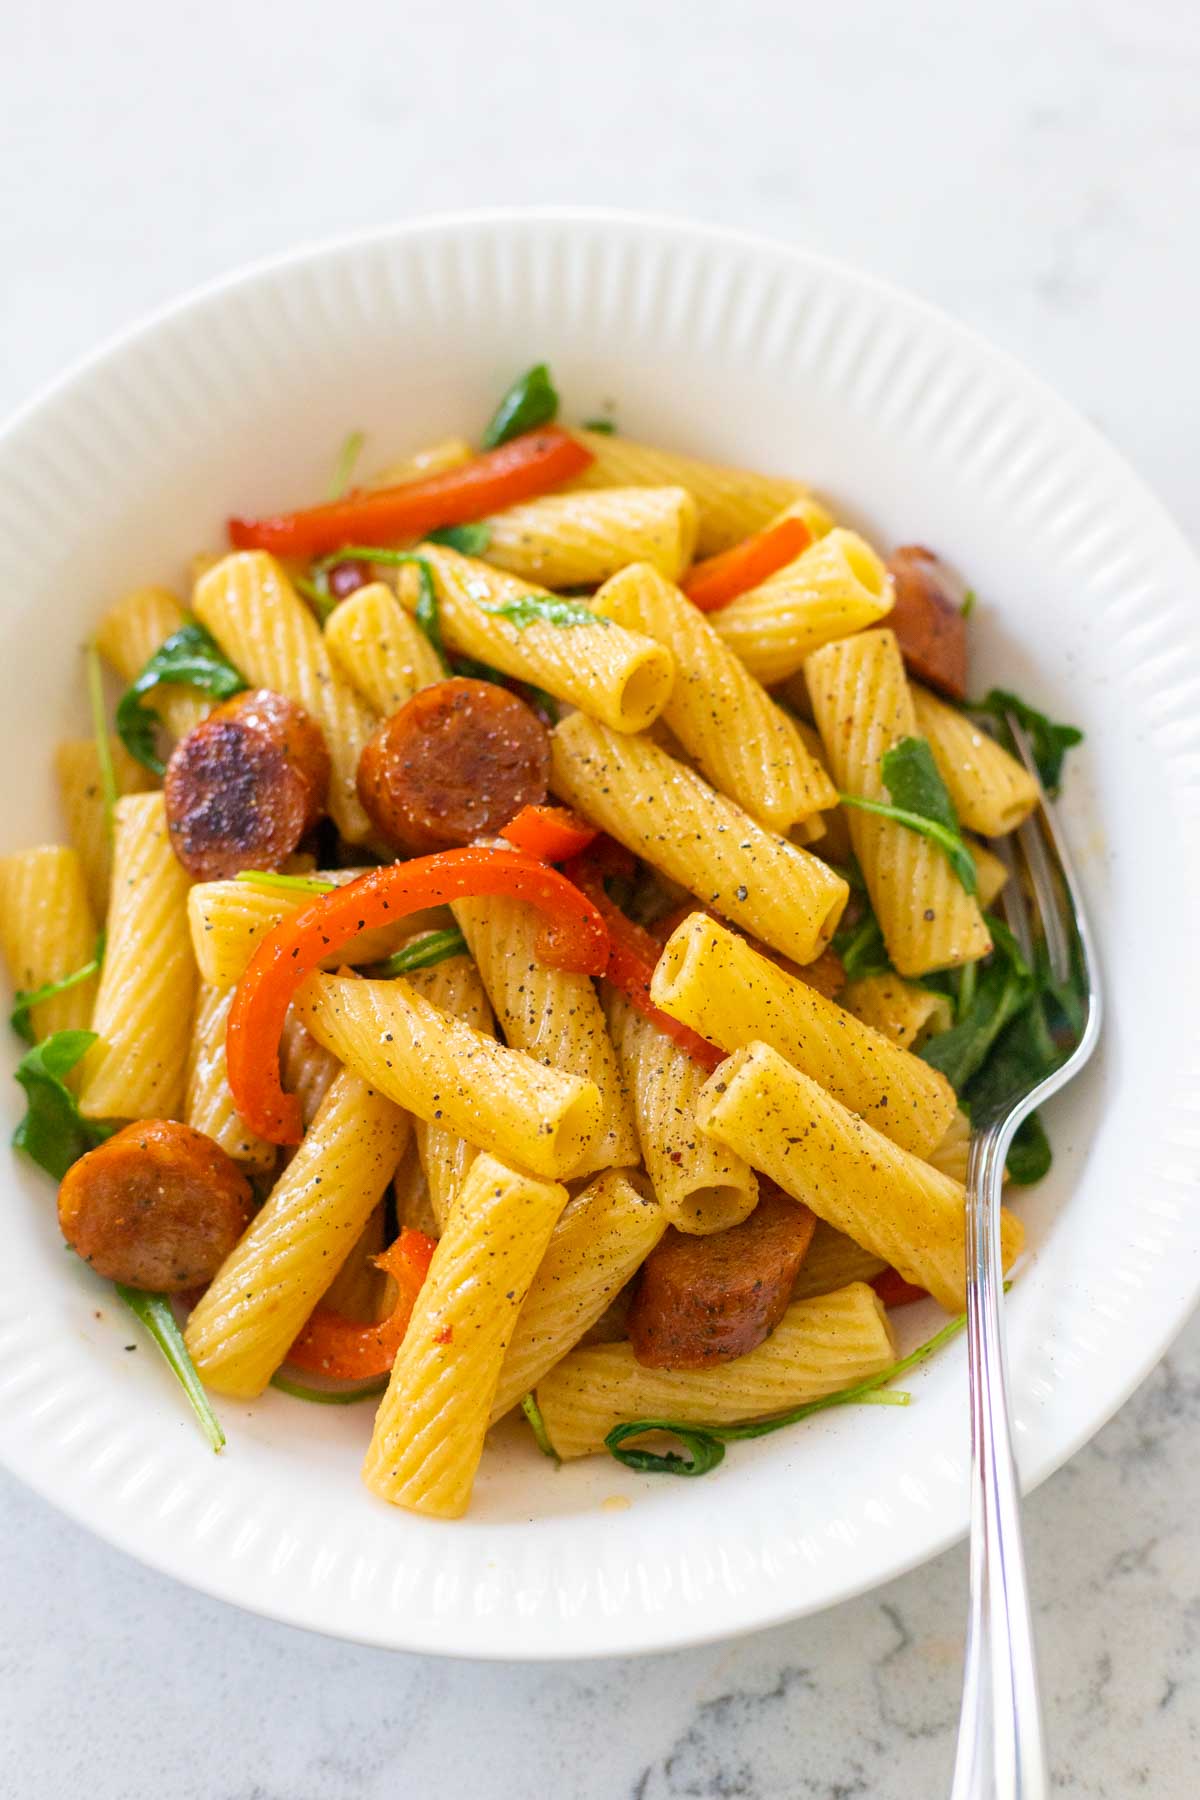 The sausage and peppers pasta is in a white bowl with a fork.